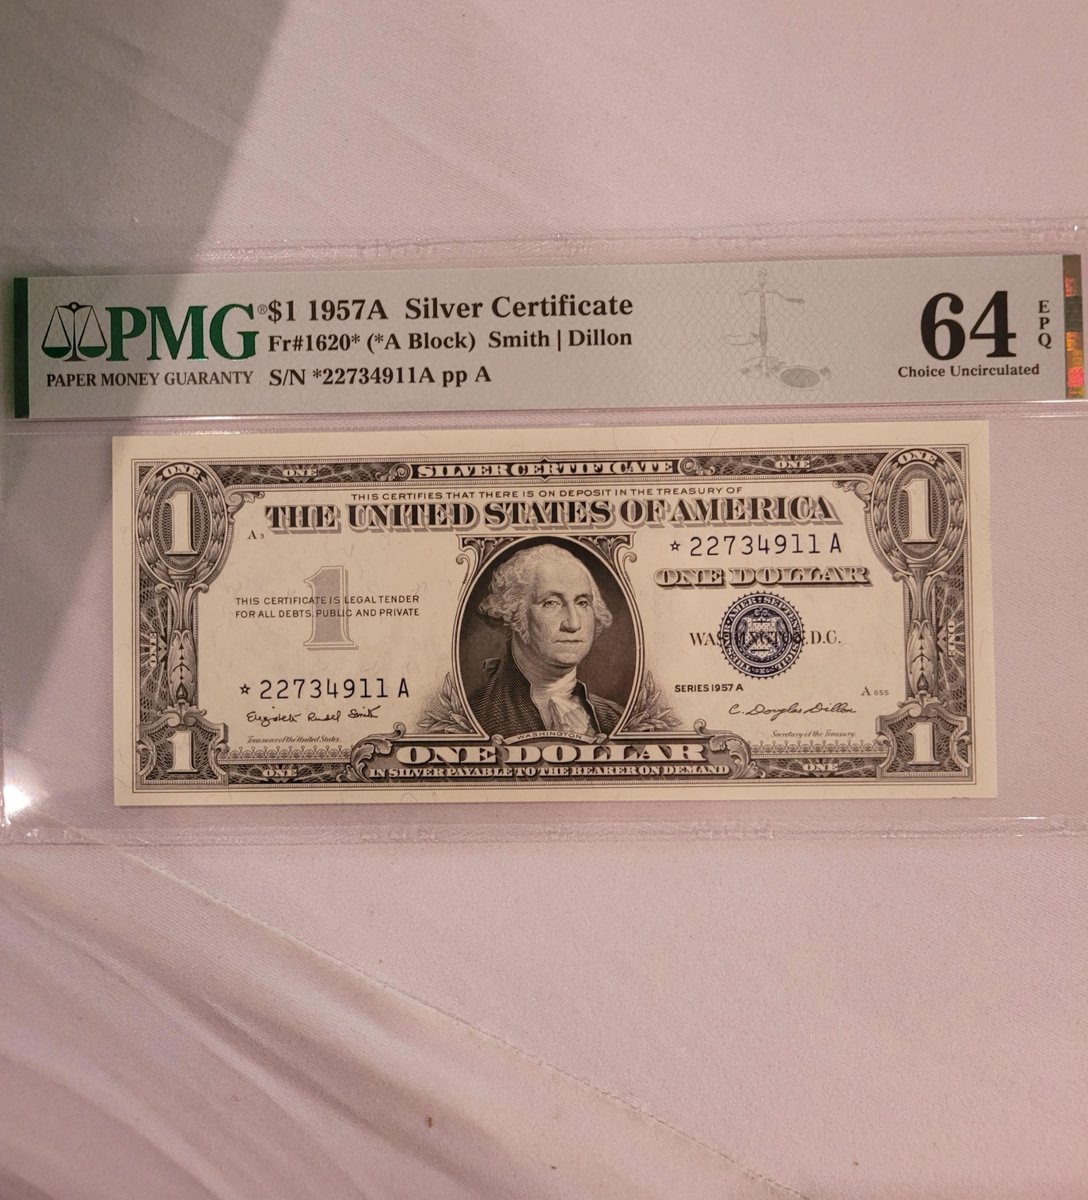 Do you collect silver certificates? #silvercertificate #money #currency #banknote #dollar #dollarbill #usd #papermoney